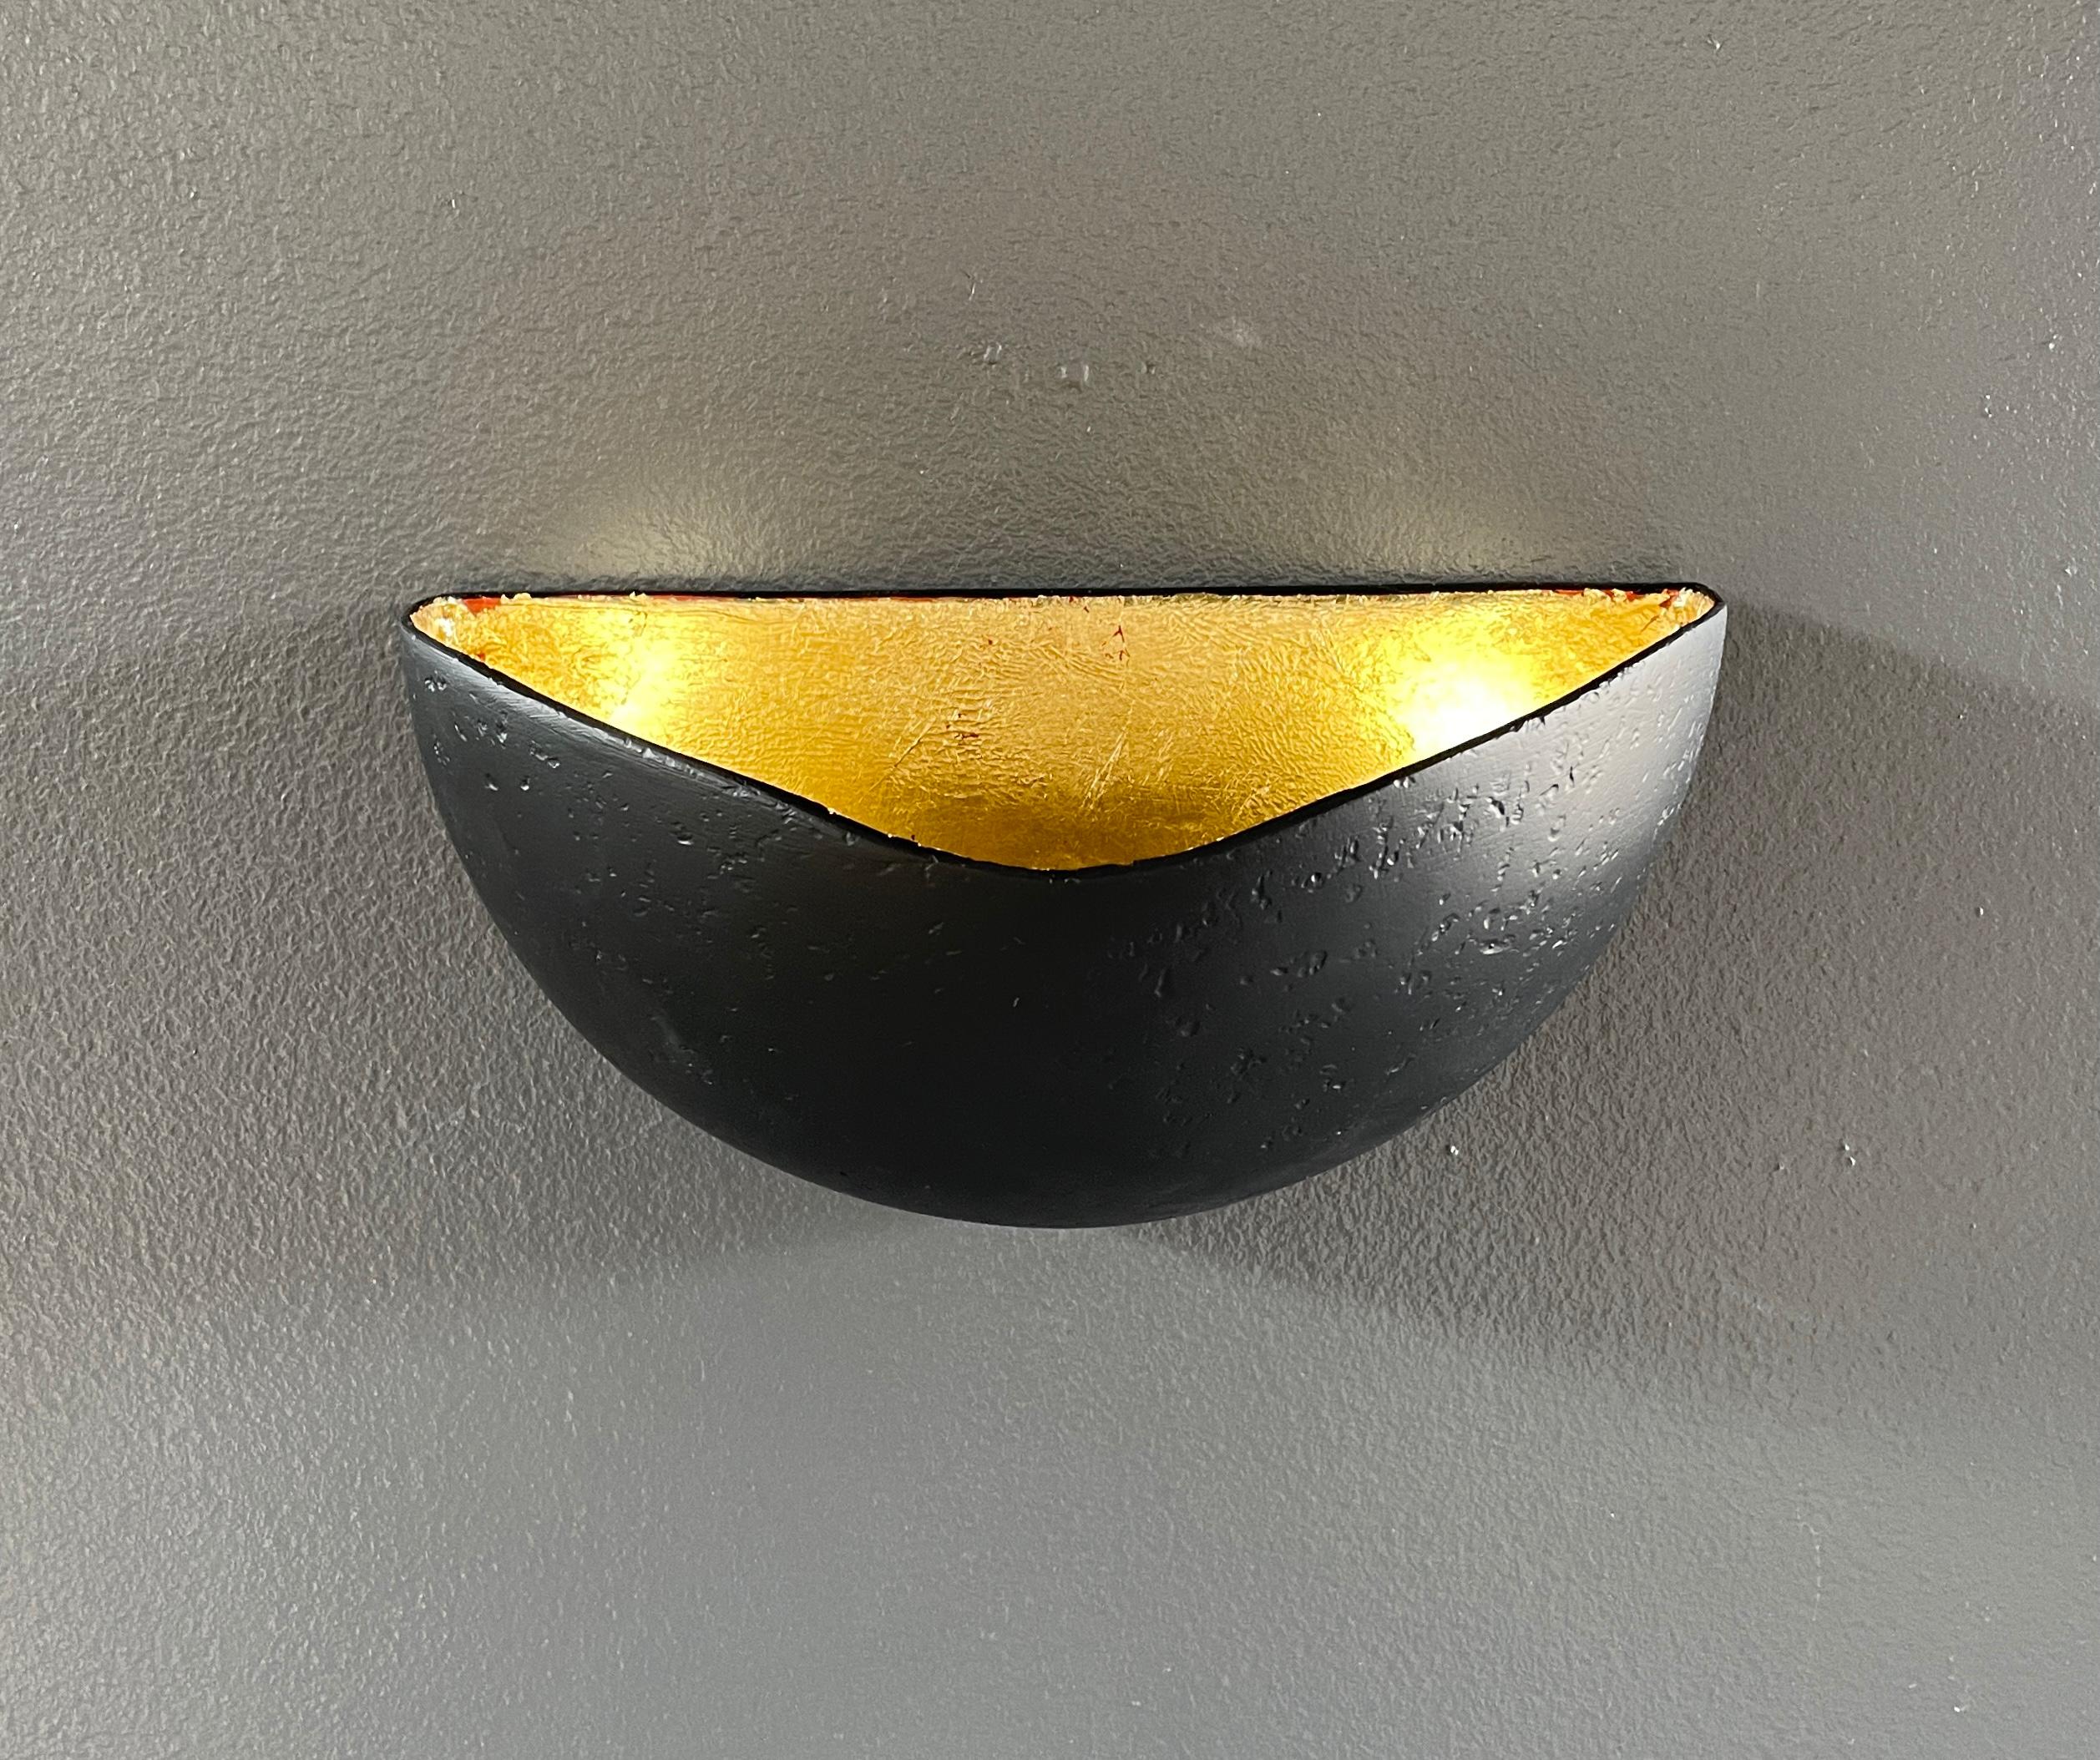 Designed to complement our St Germain chandelier, these wall sconces have a half dome shape and are handcrafted with our signature plaster of Paris finish. They provide an indirect uplight. A gold leaf or a black interior can be specified. The